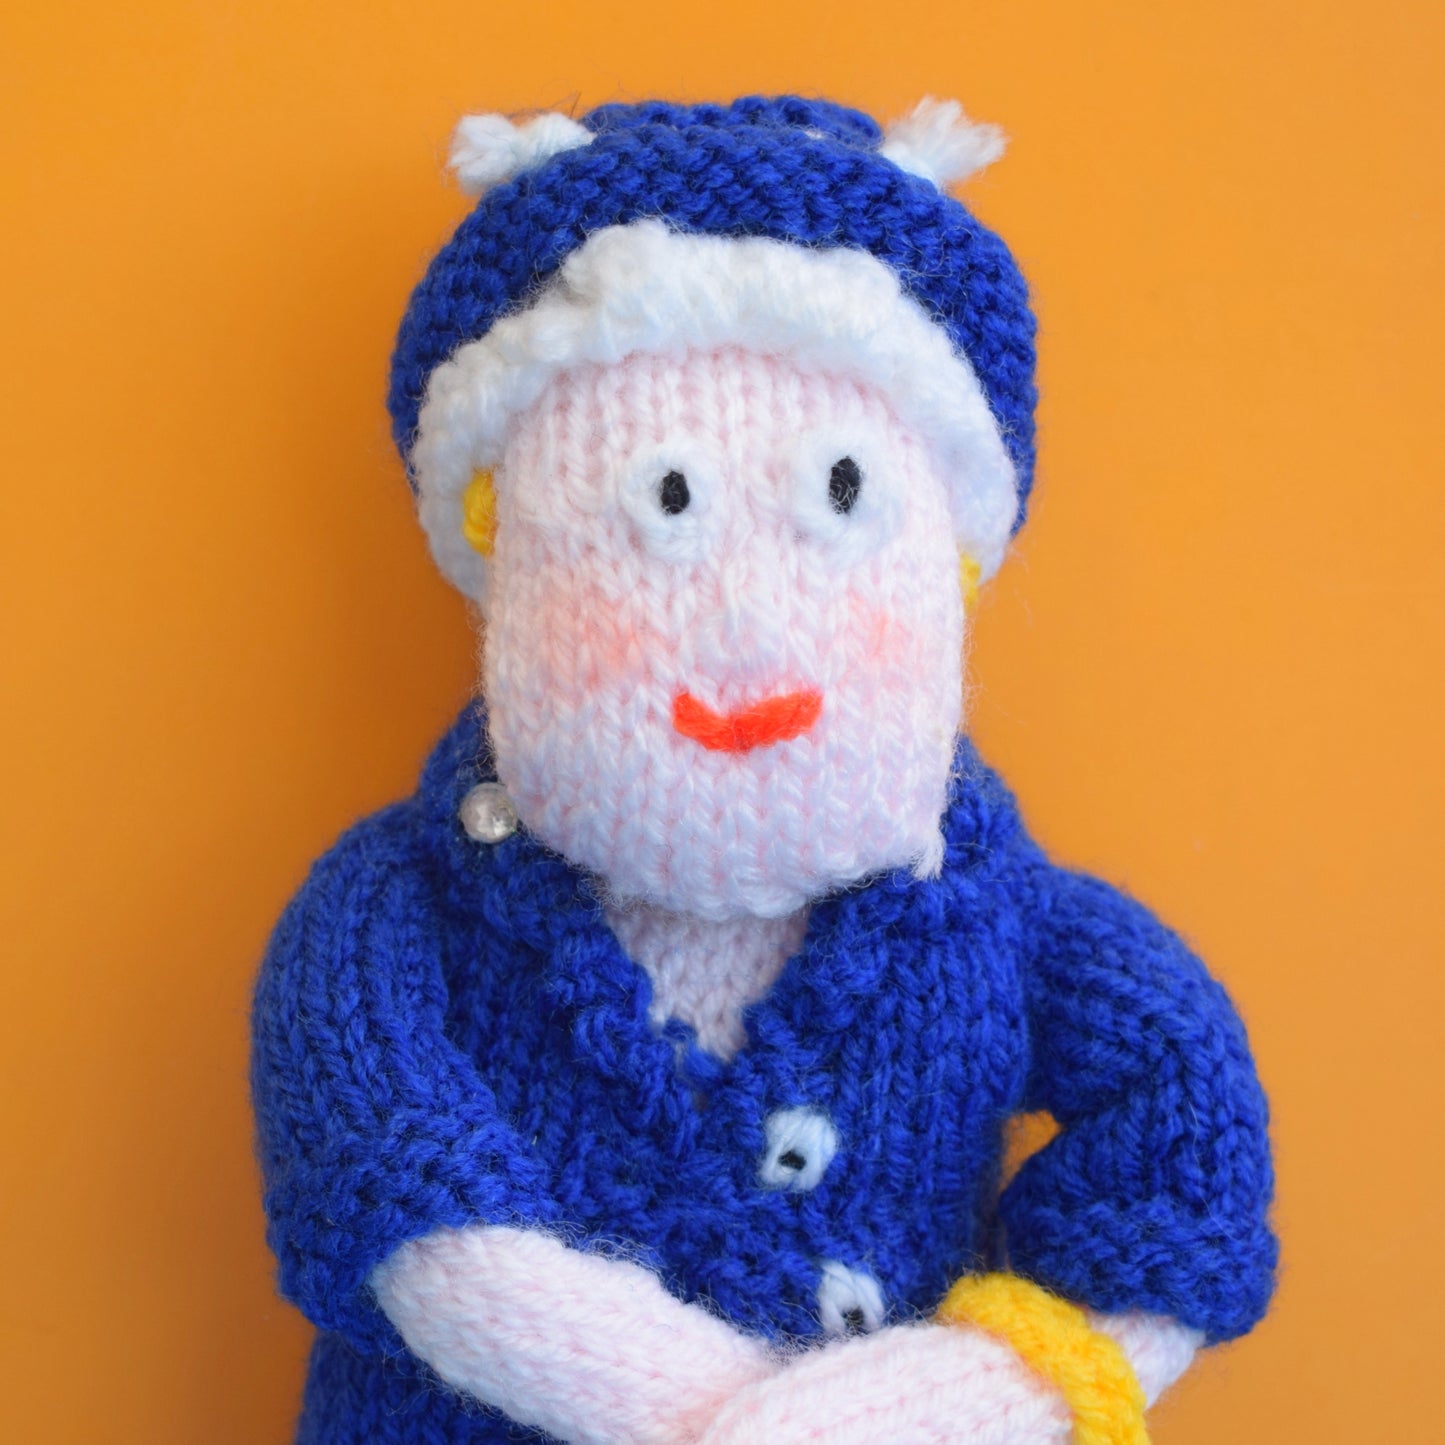 Vintage Knitted Little Old Lady Toy